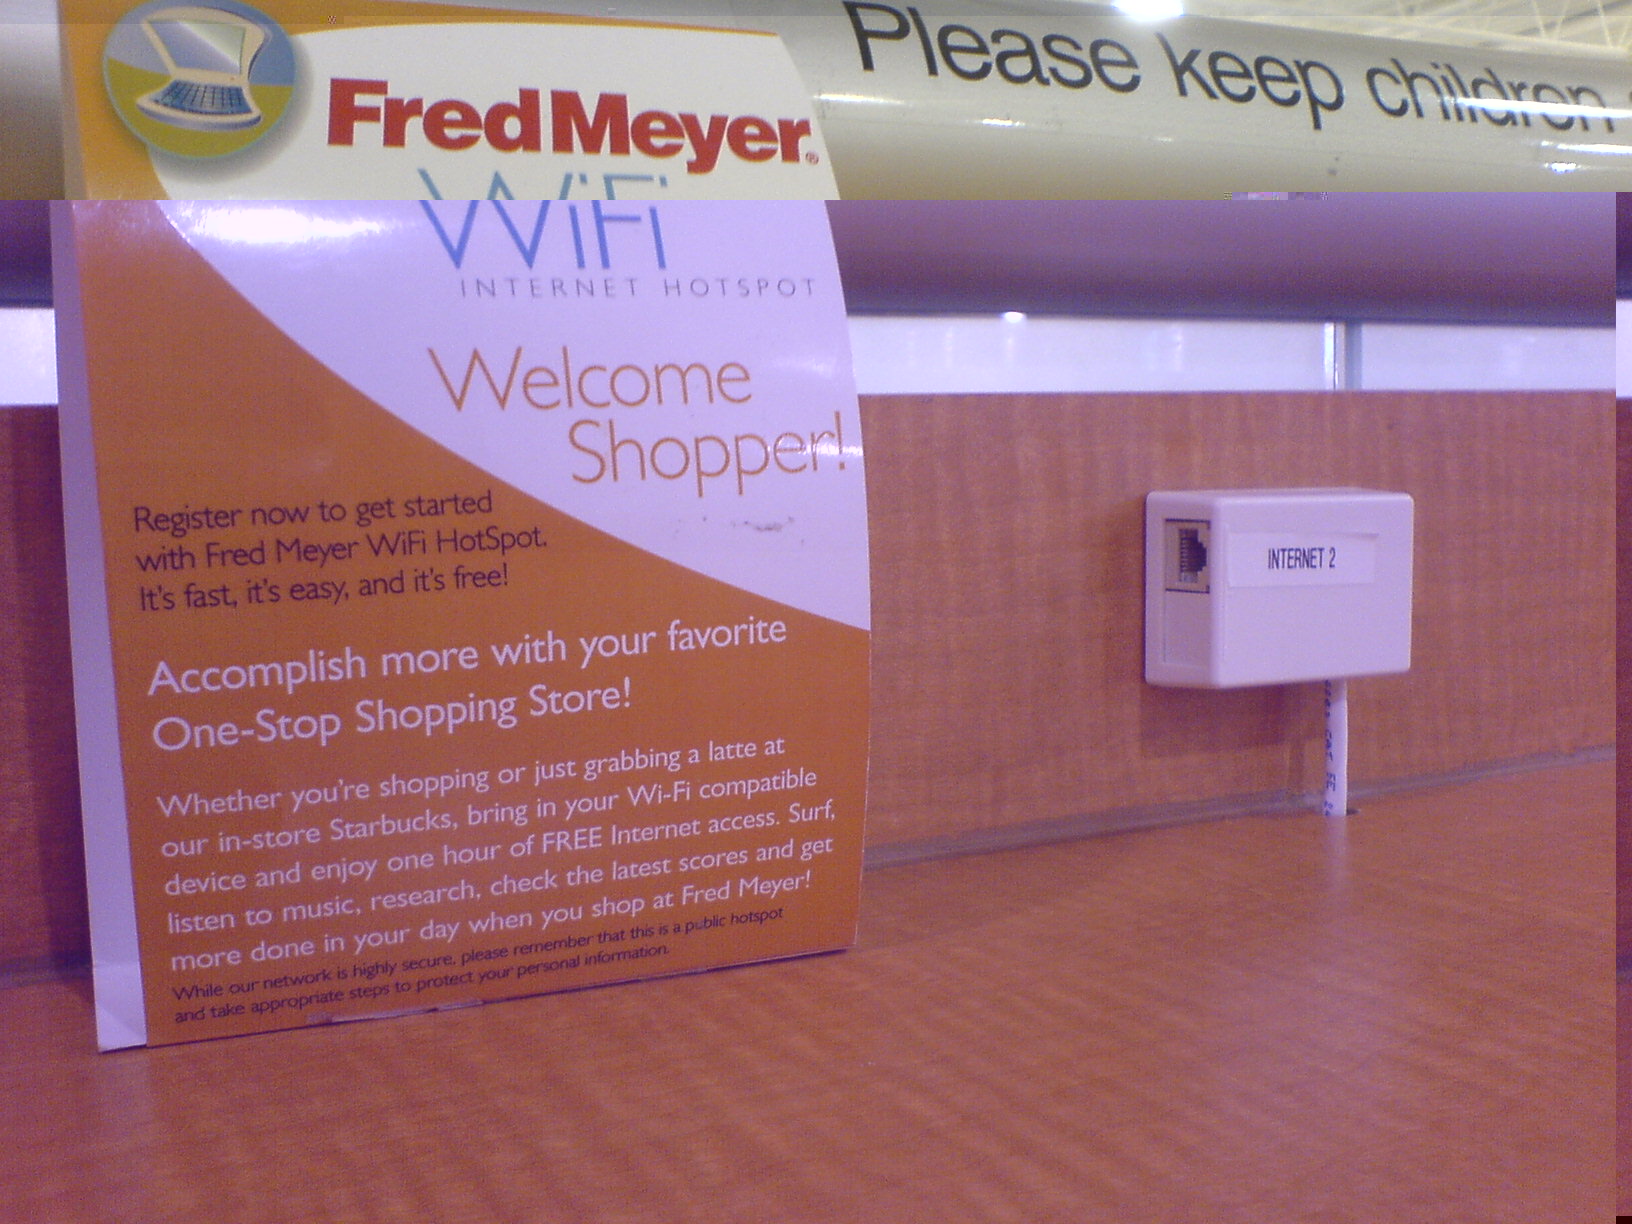 Web 2.0 at Fred Meyer’s